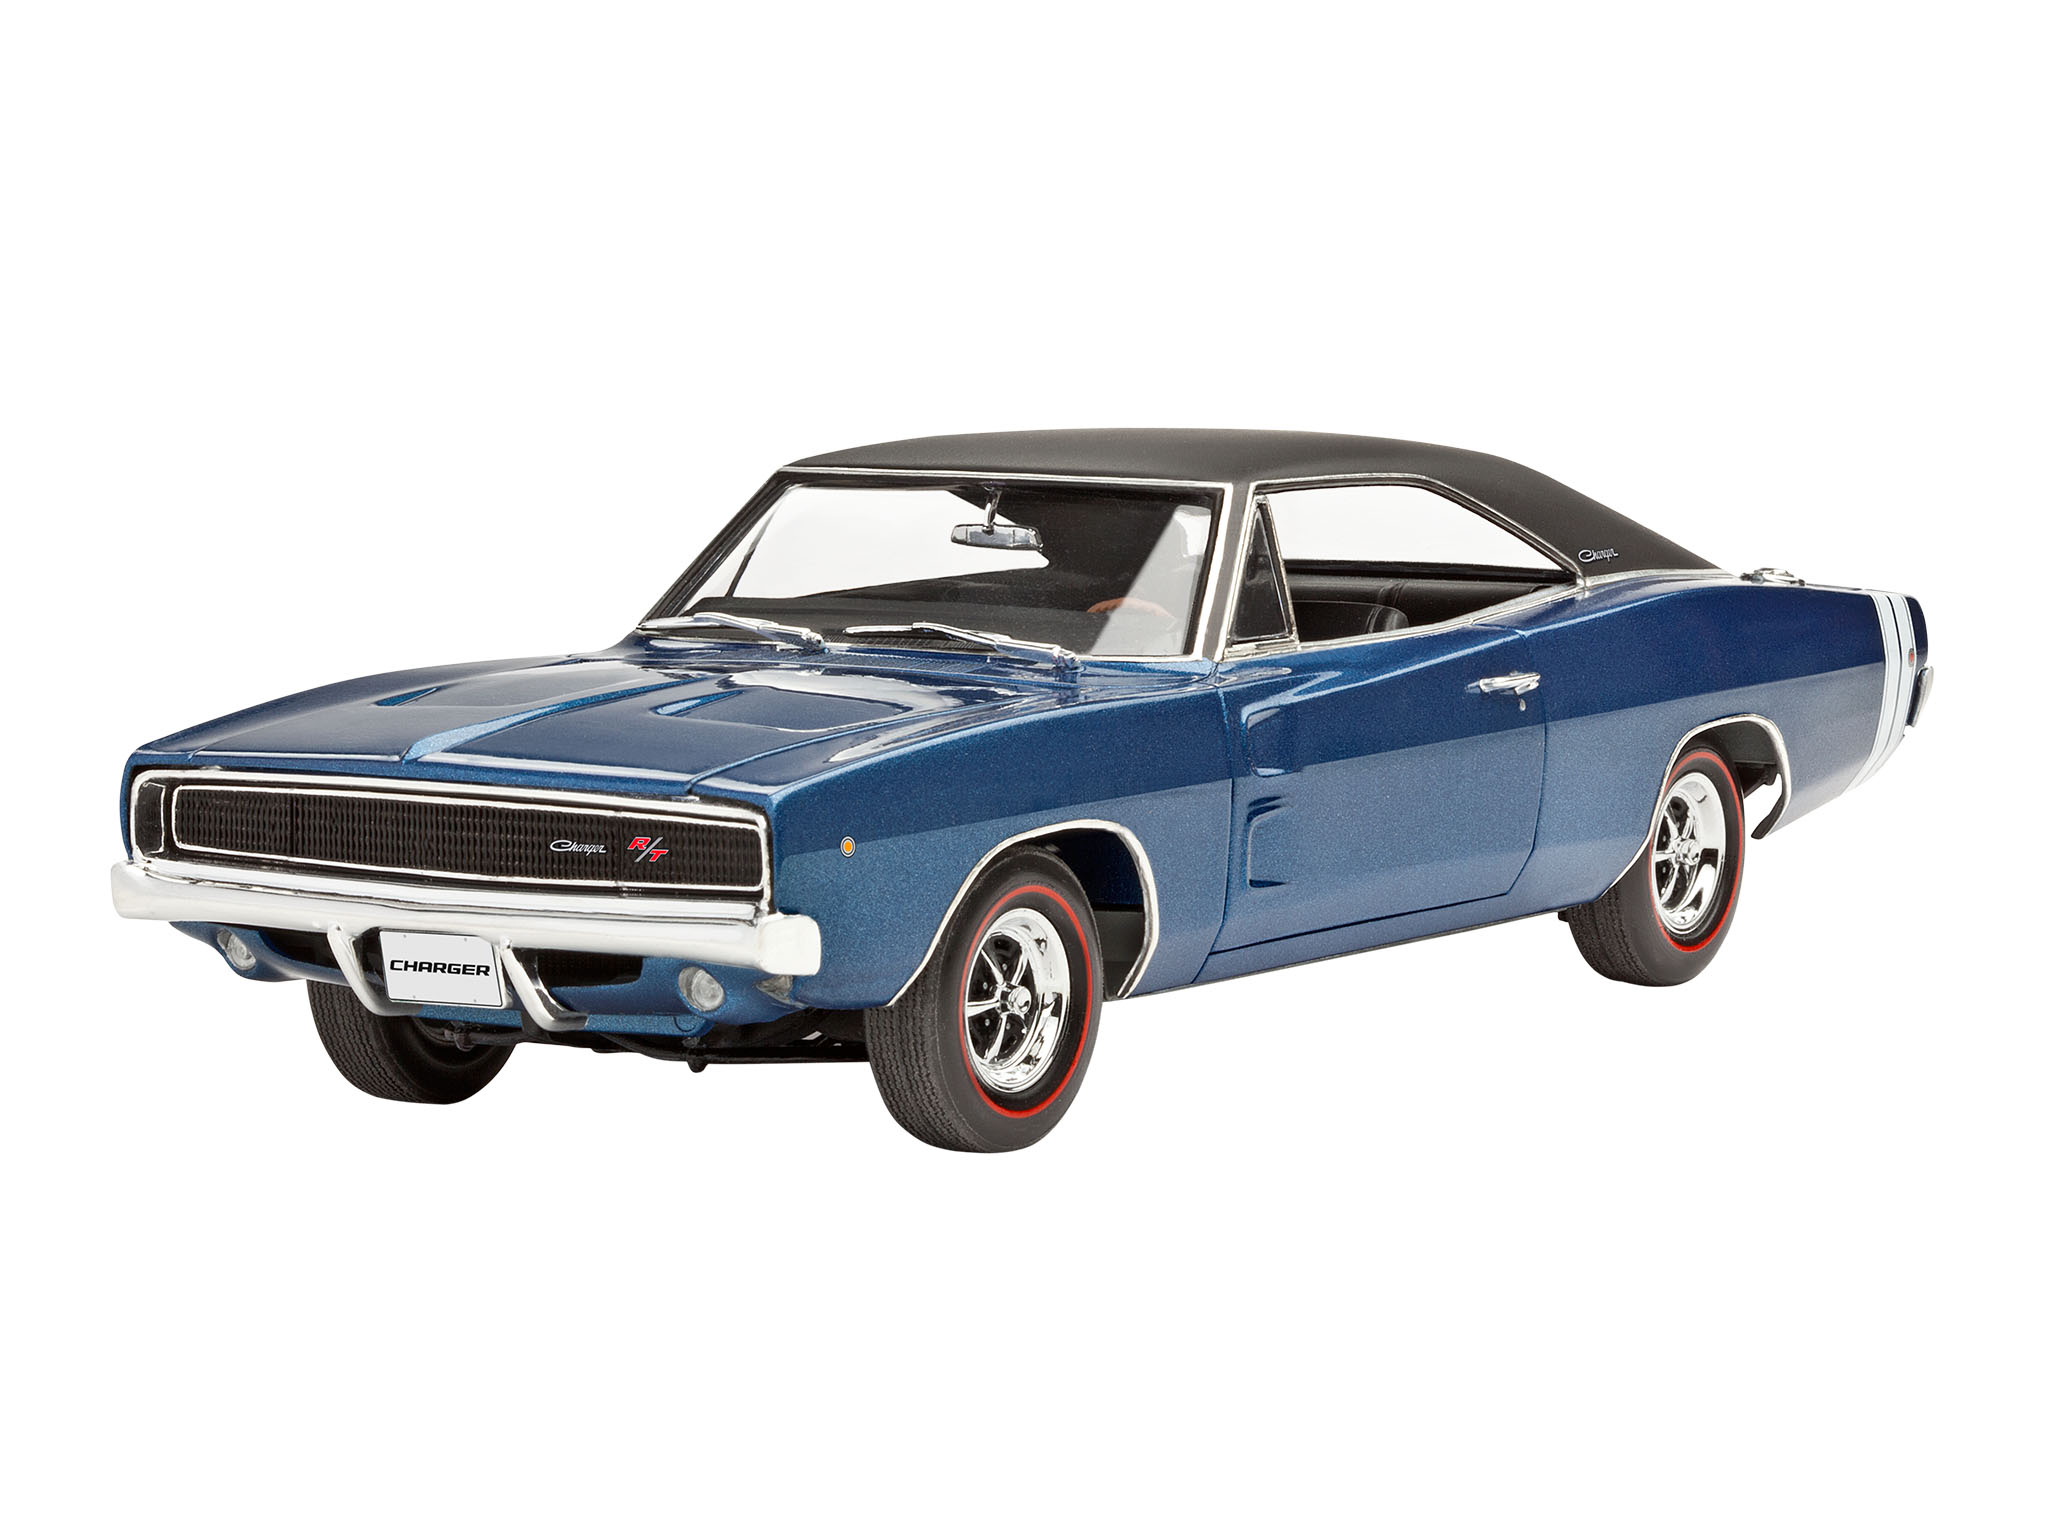 1:25 Dodge Charger 1968 2in1 - 1968 Dodge Charger R/T 1:25